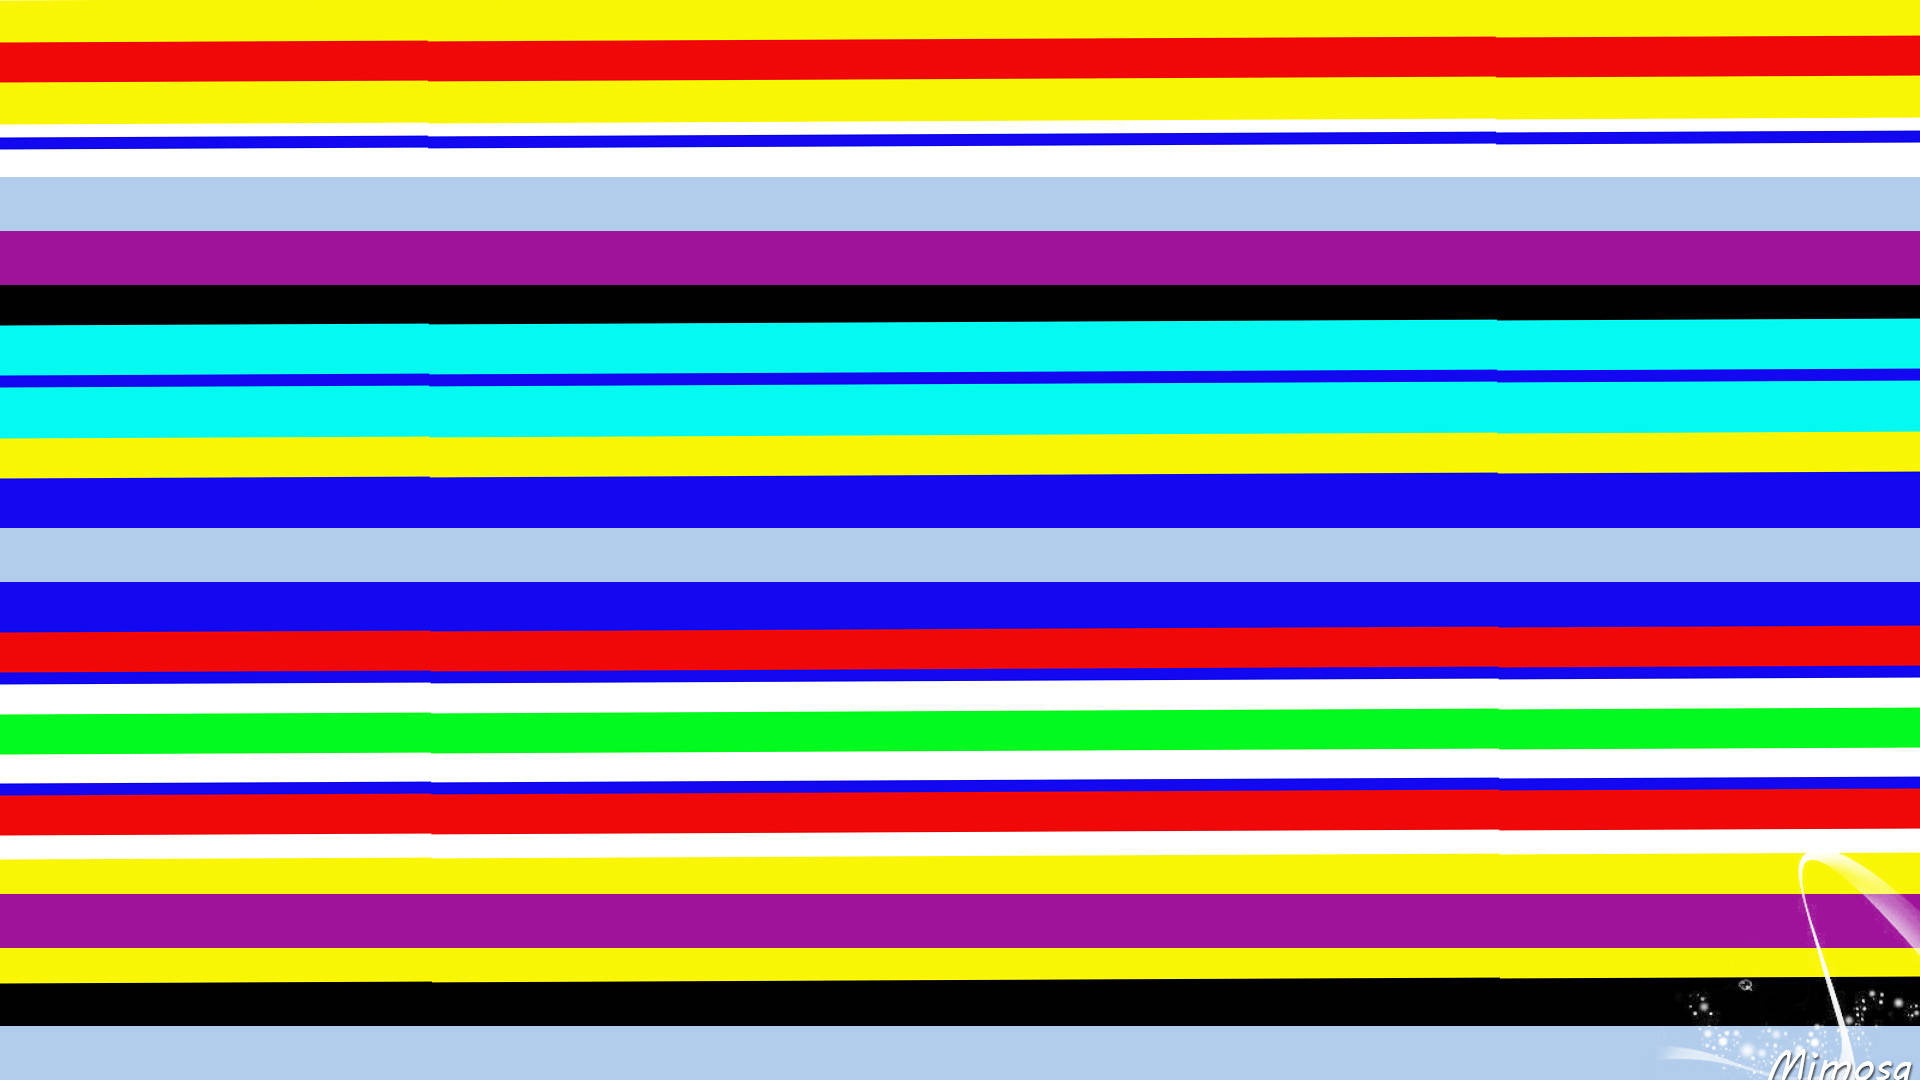 Download Striped Beautiful Wallpaper Stripes RoyaltyFree Vector Graphic   Pixabay